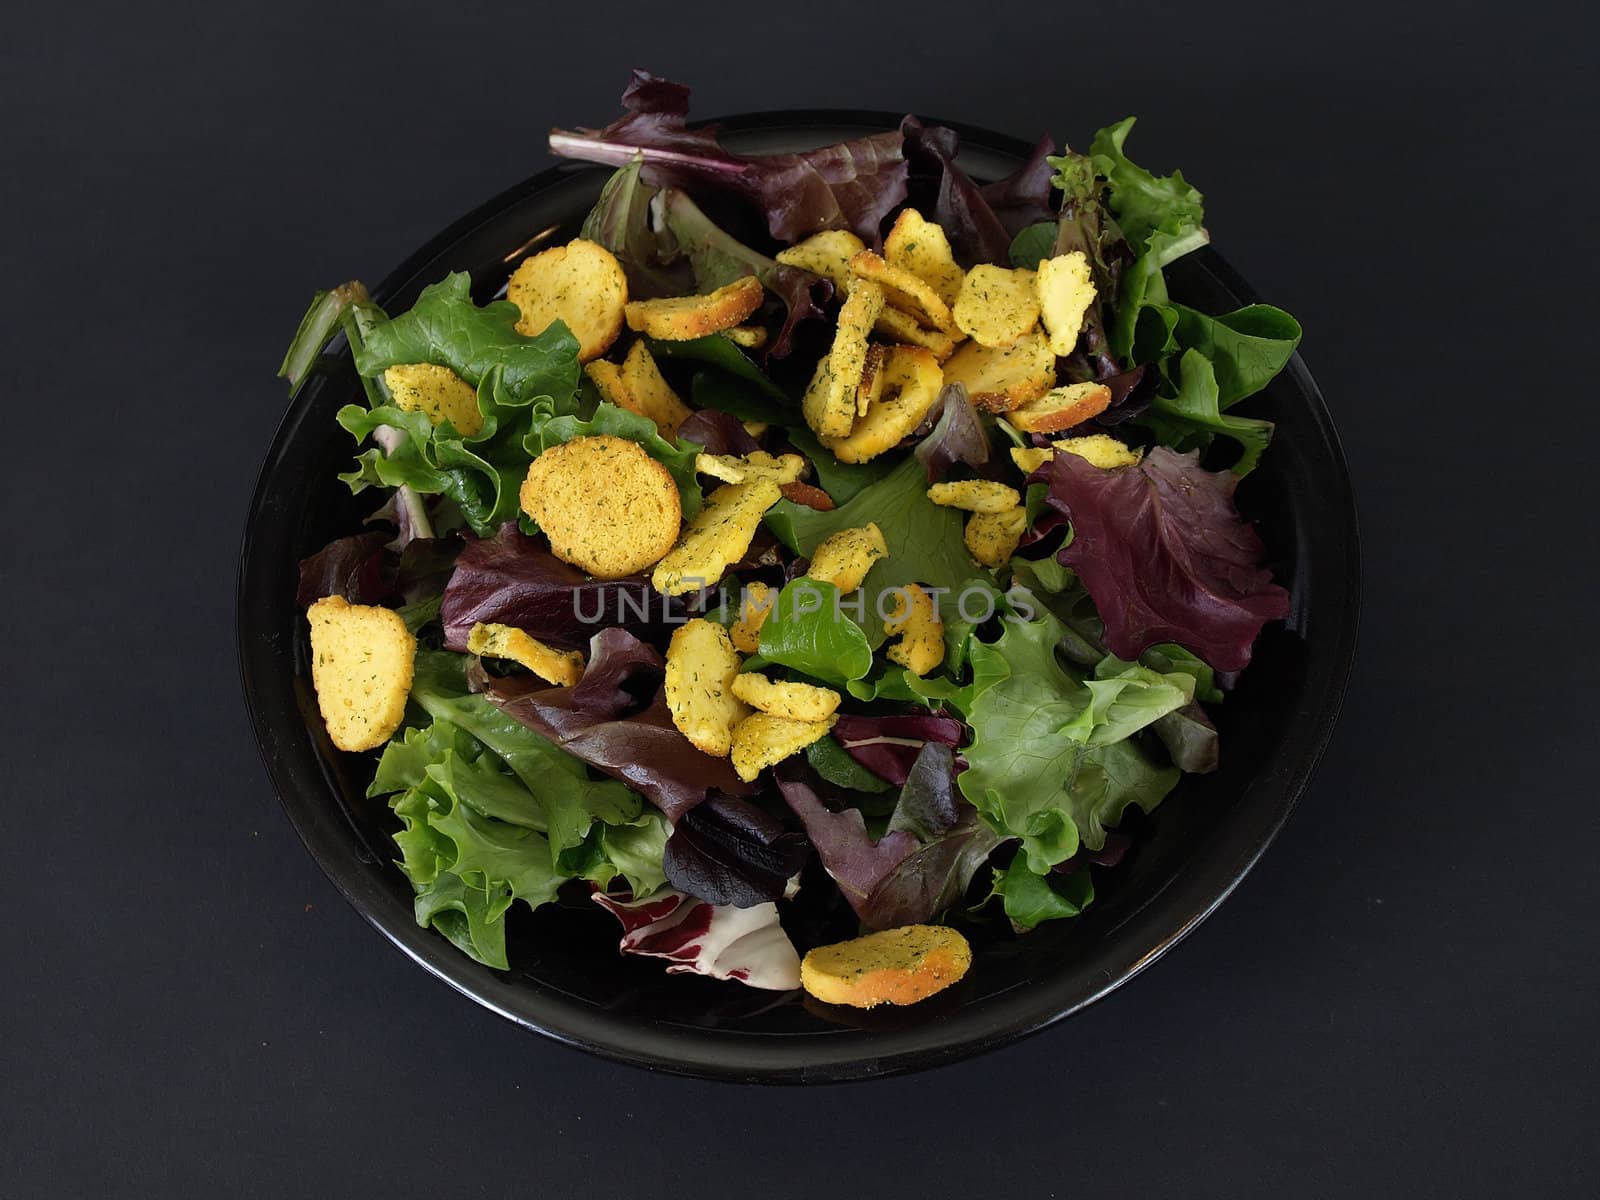 A black plate of salad with crutons and green and purple leaves over a black background.